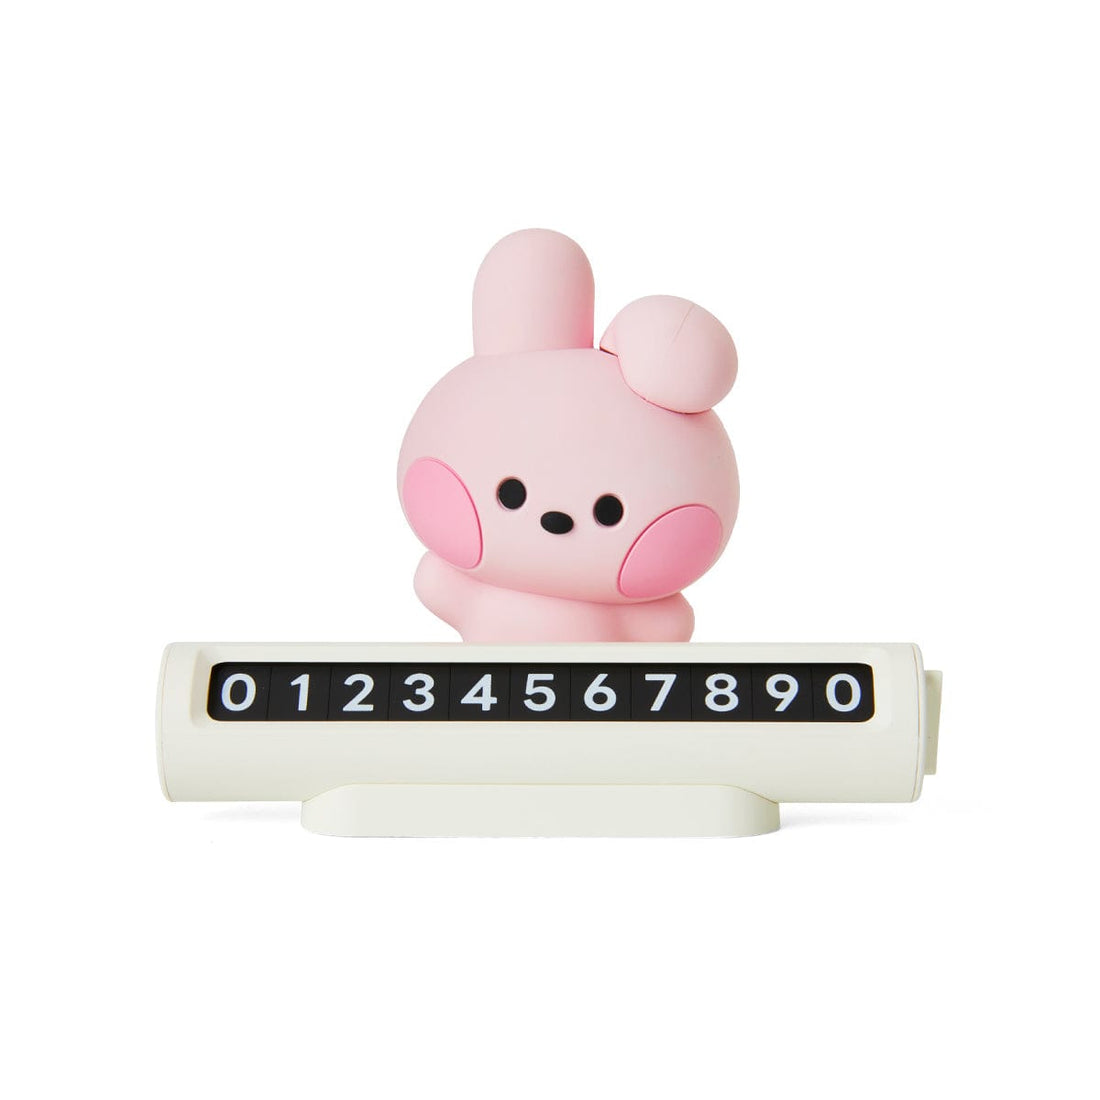 LINE FRIENDS LIVING COOKY BT21 COOKY minini PARKING PHONE NUMBER PLATE